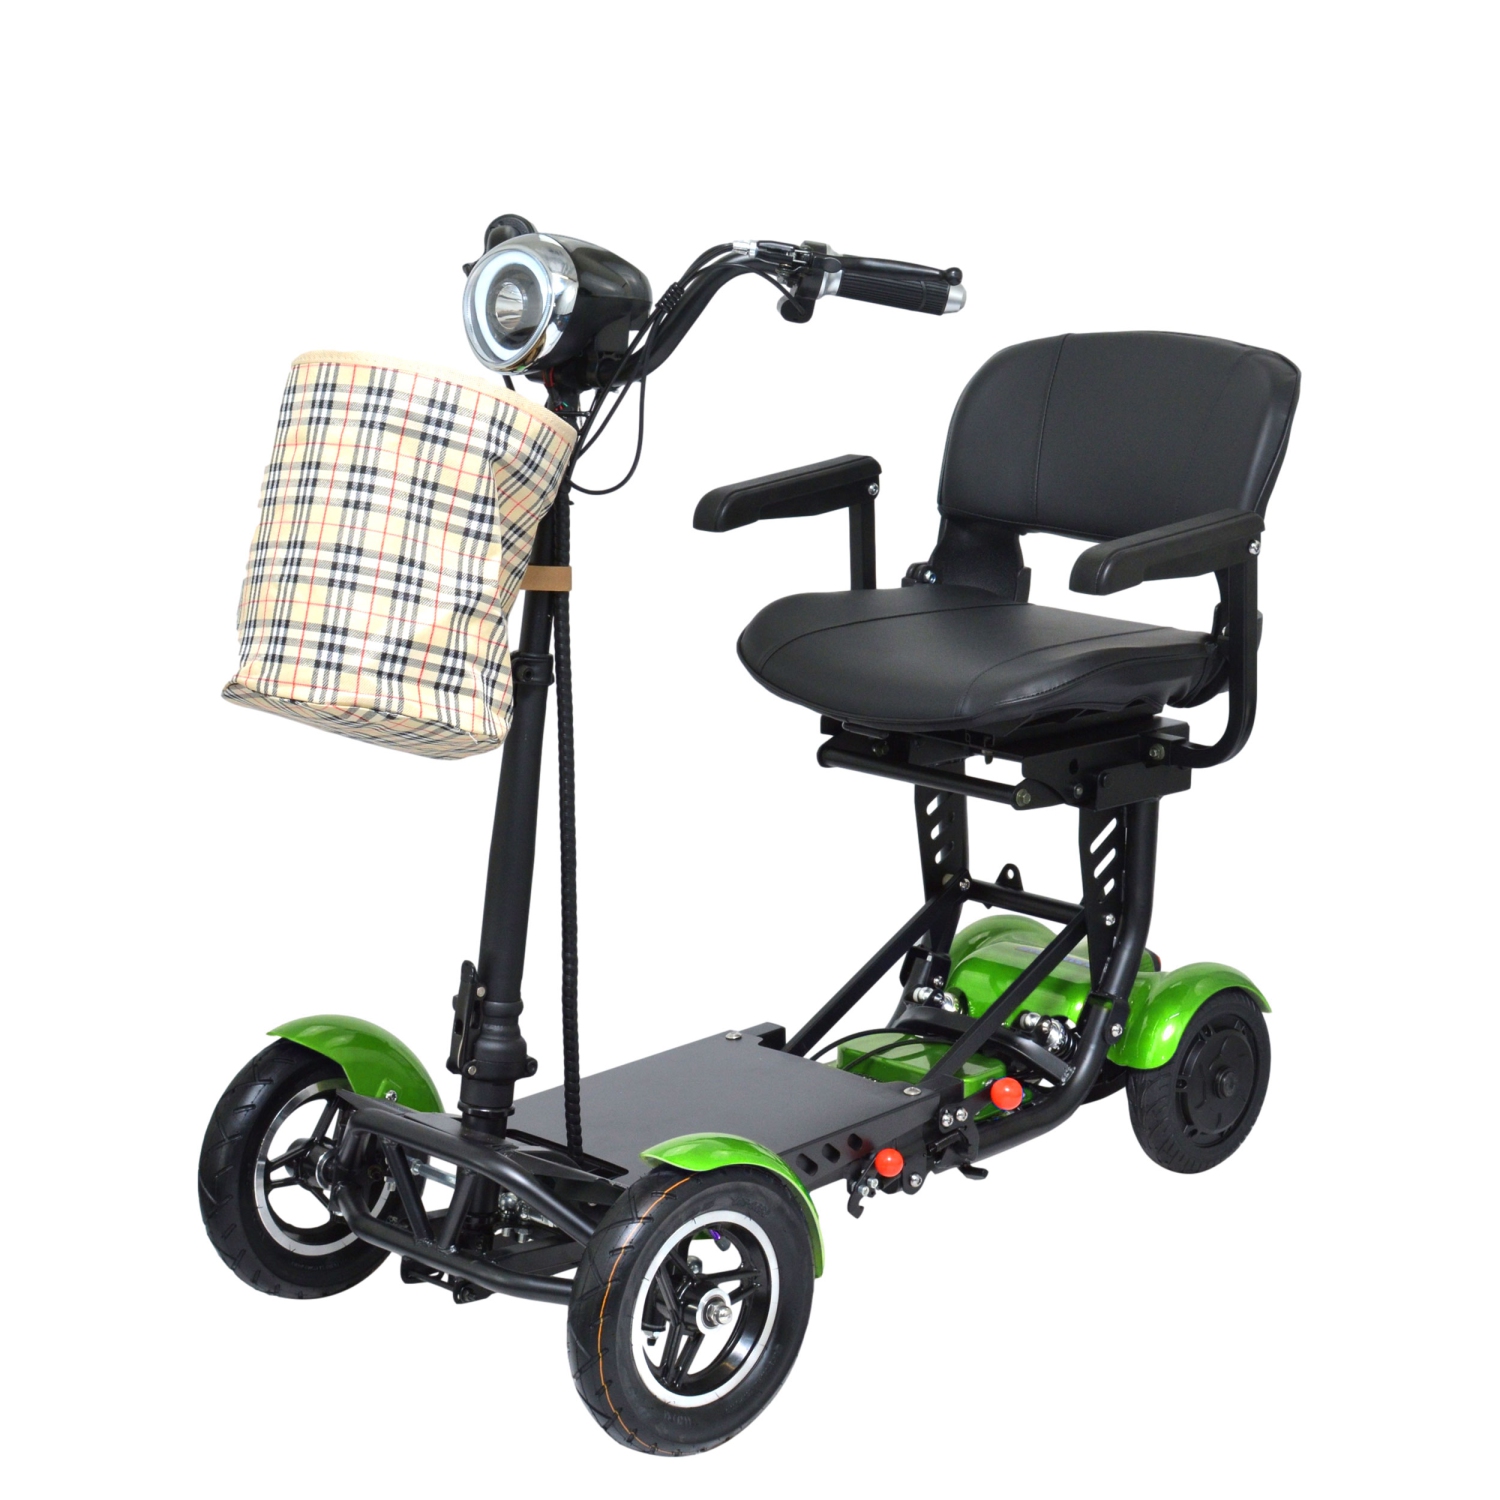 Foldable Travel Mobility Scooter, Aircraft Grade Aluminum Alloy Wheel Front basket, 300 lb Capacity Up to 12 Miles - Green Color